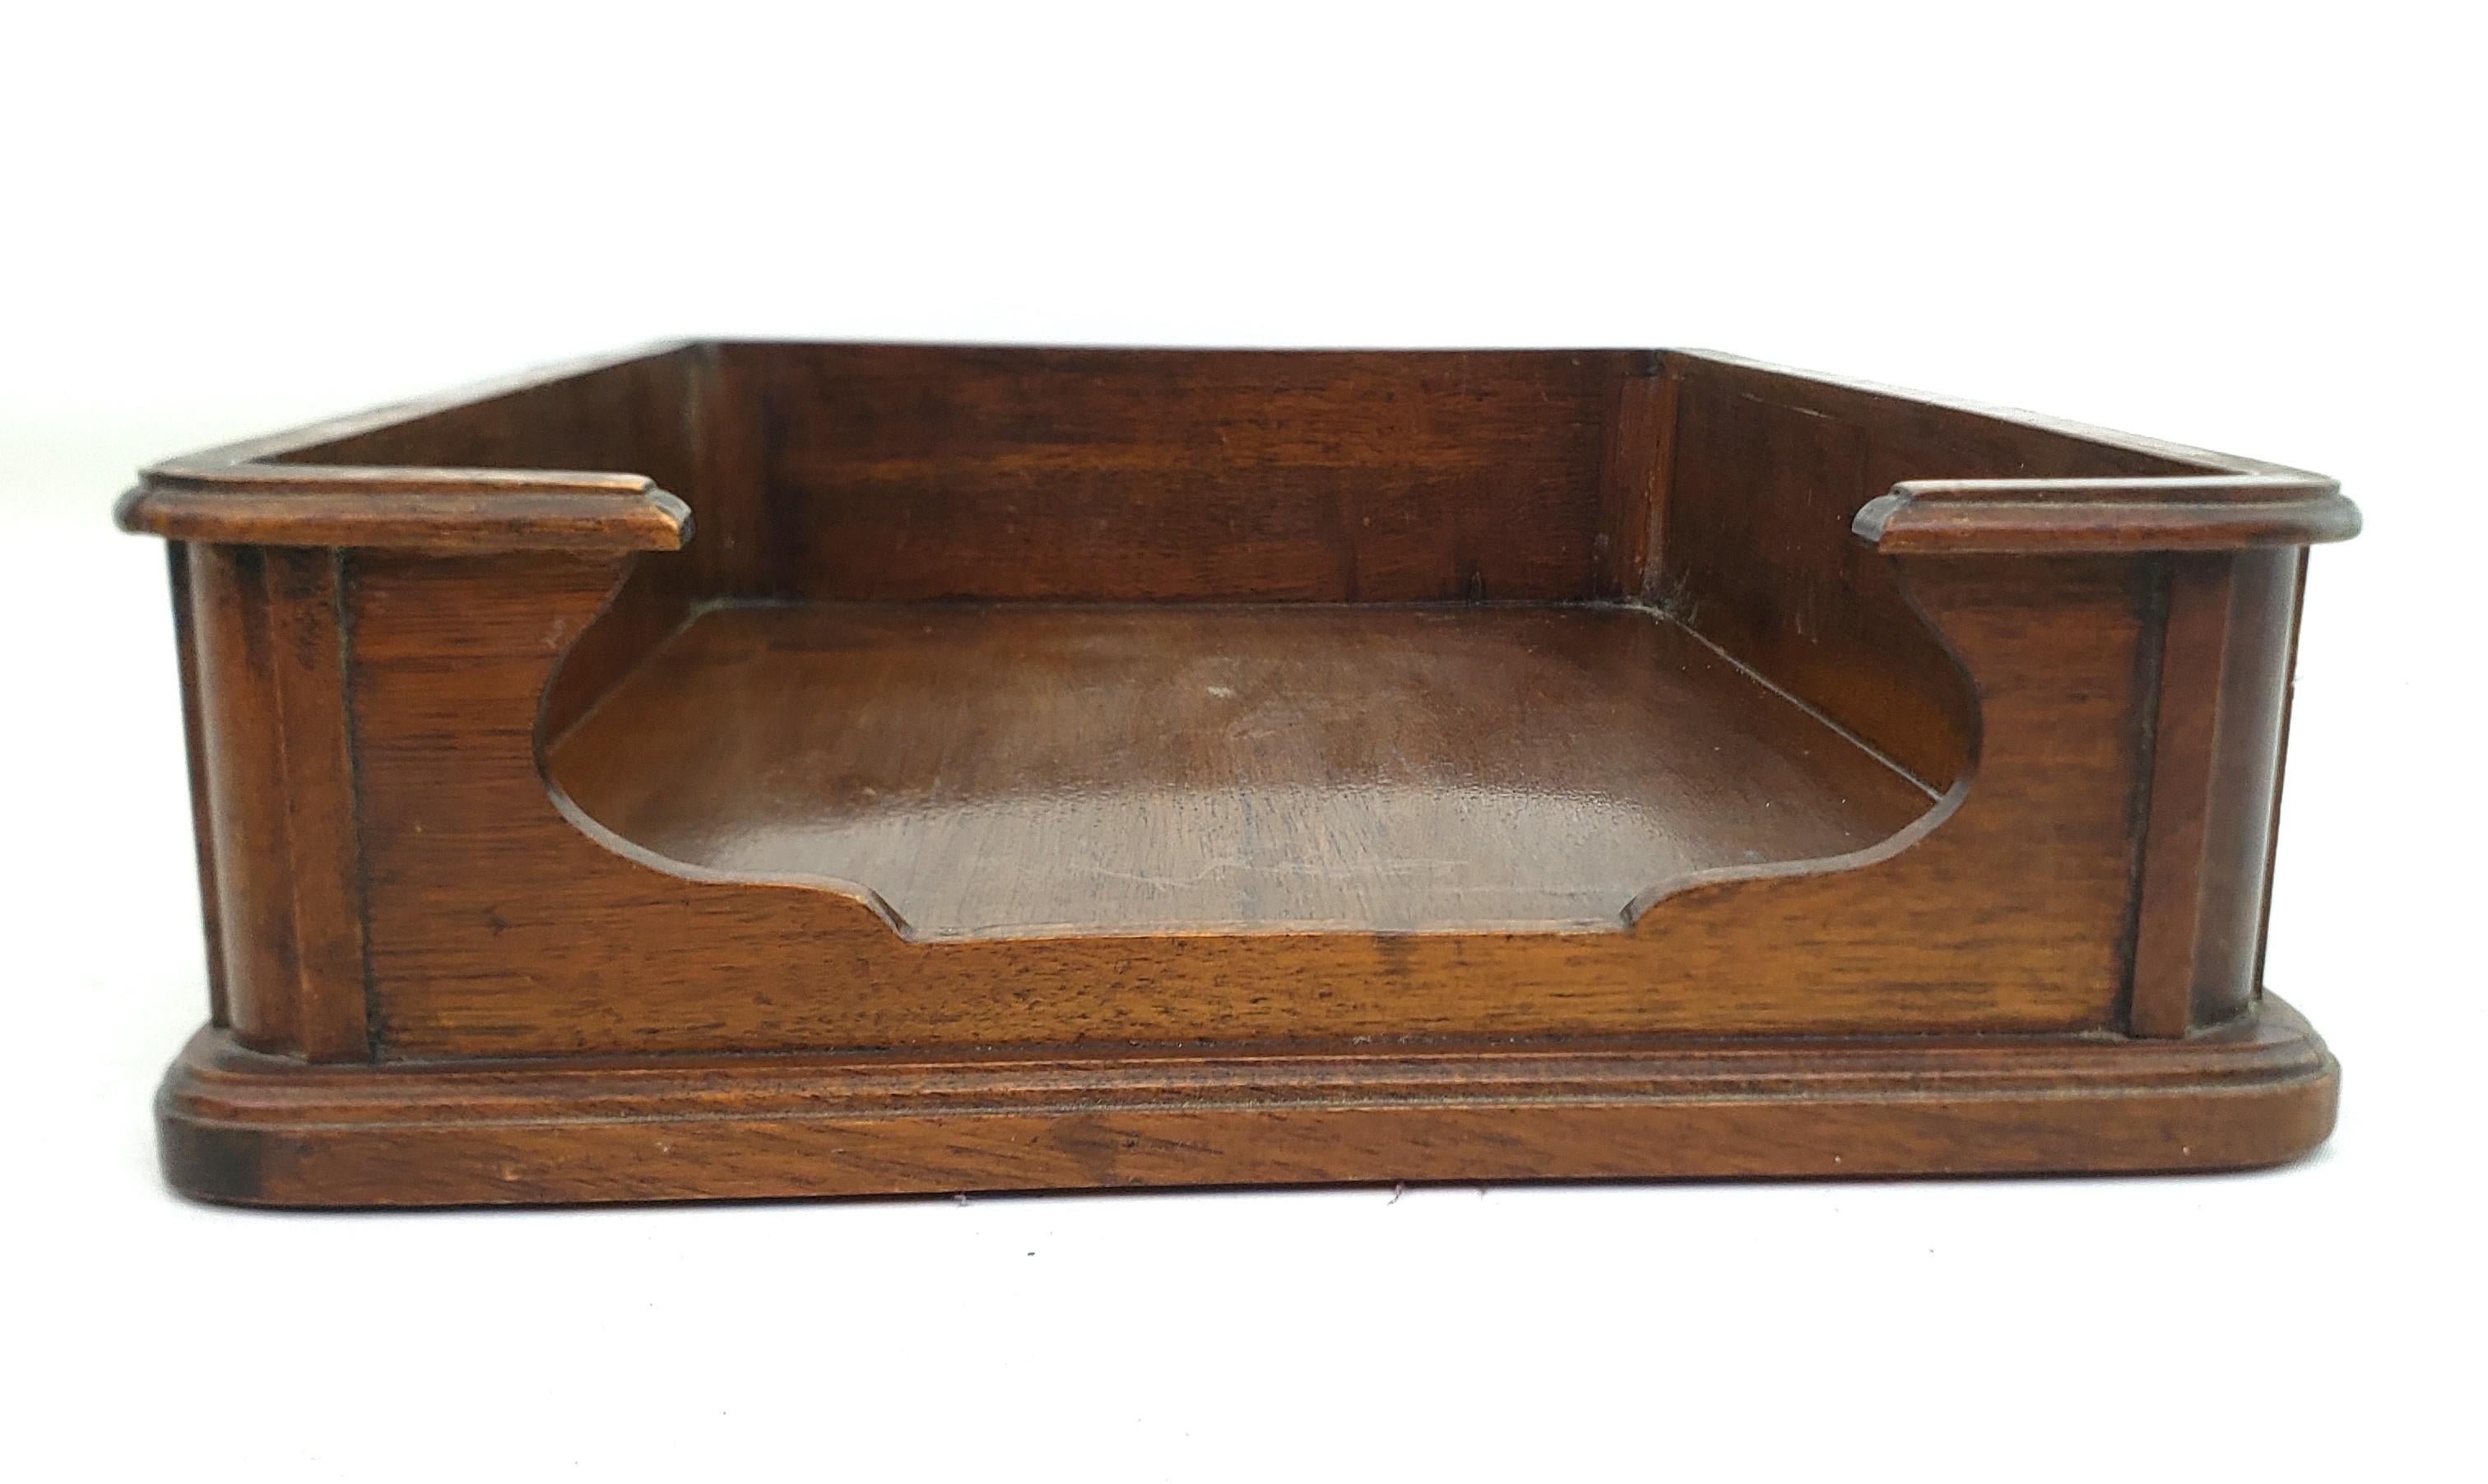 Antique Walnut Art Deco Executive Desk Tray or Document & Letter Holder In Good Condition For Sale In Hamilton, Ontario